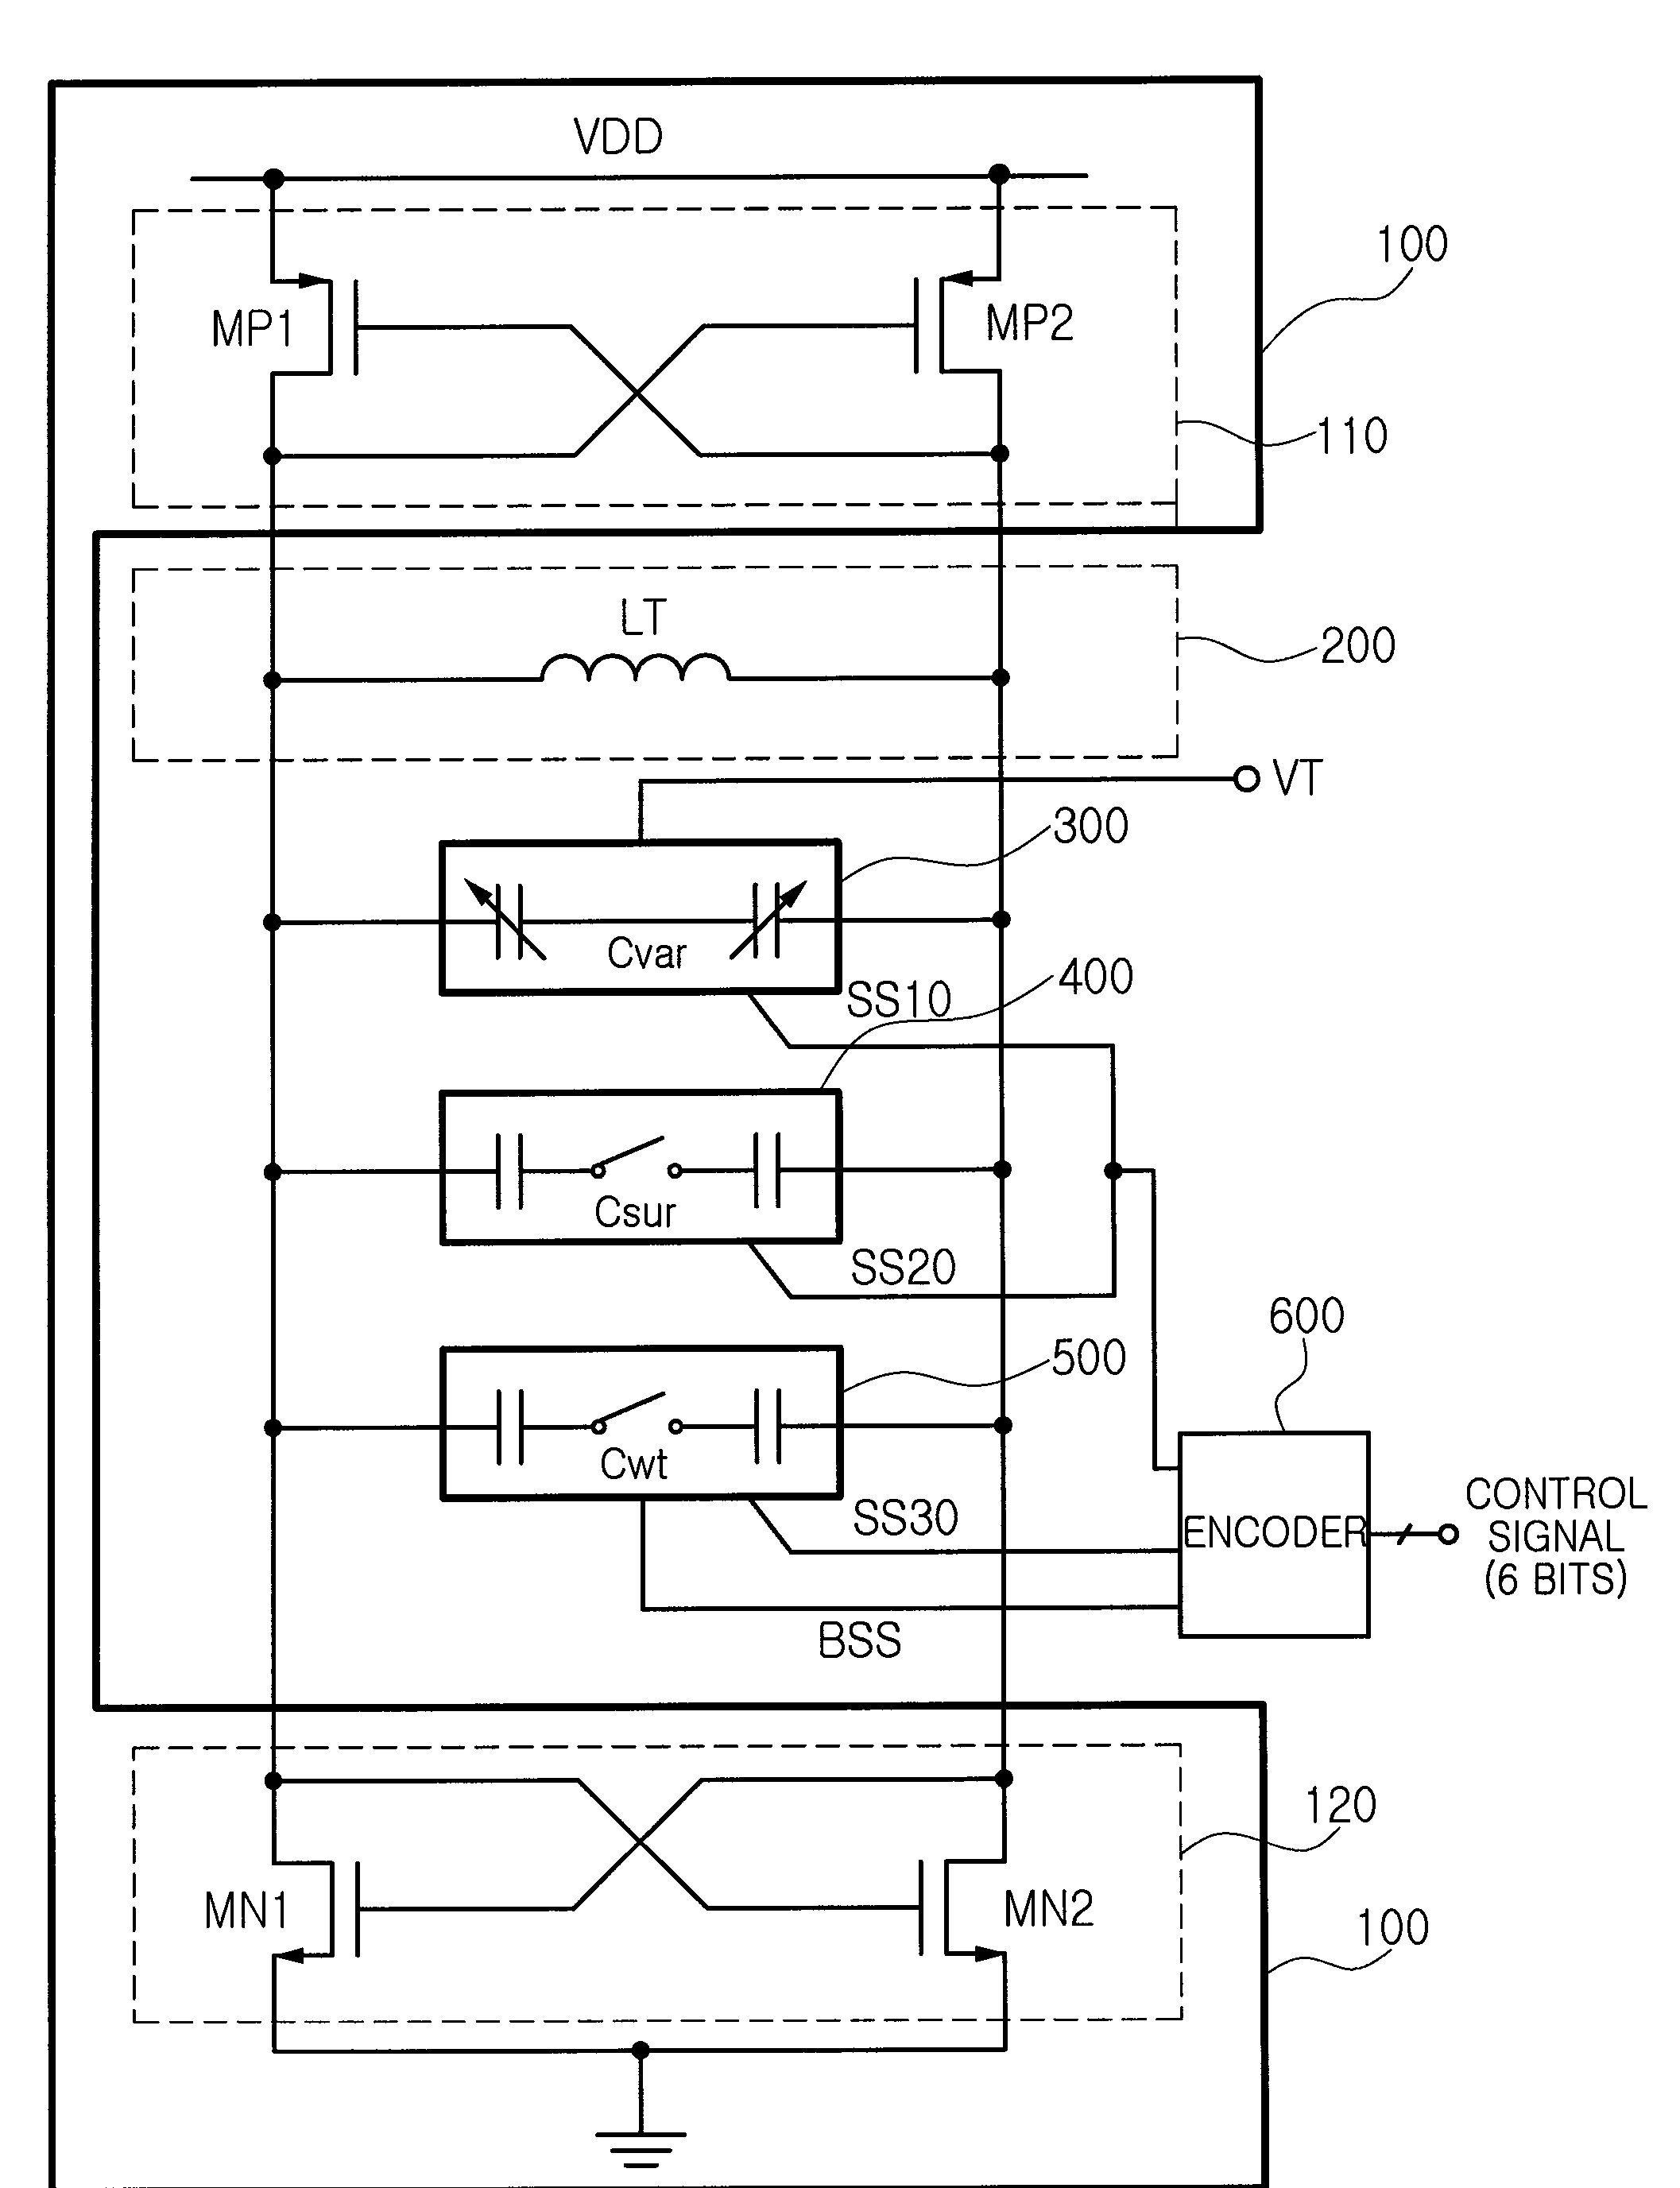 Wide-band voltage controlled oscillator